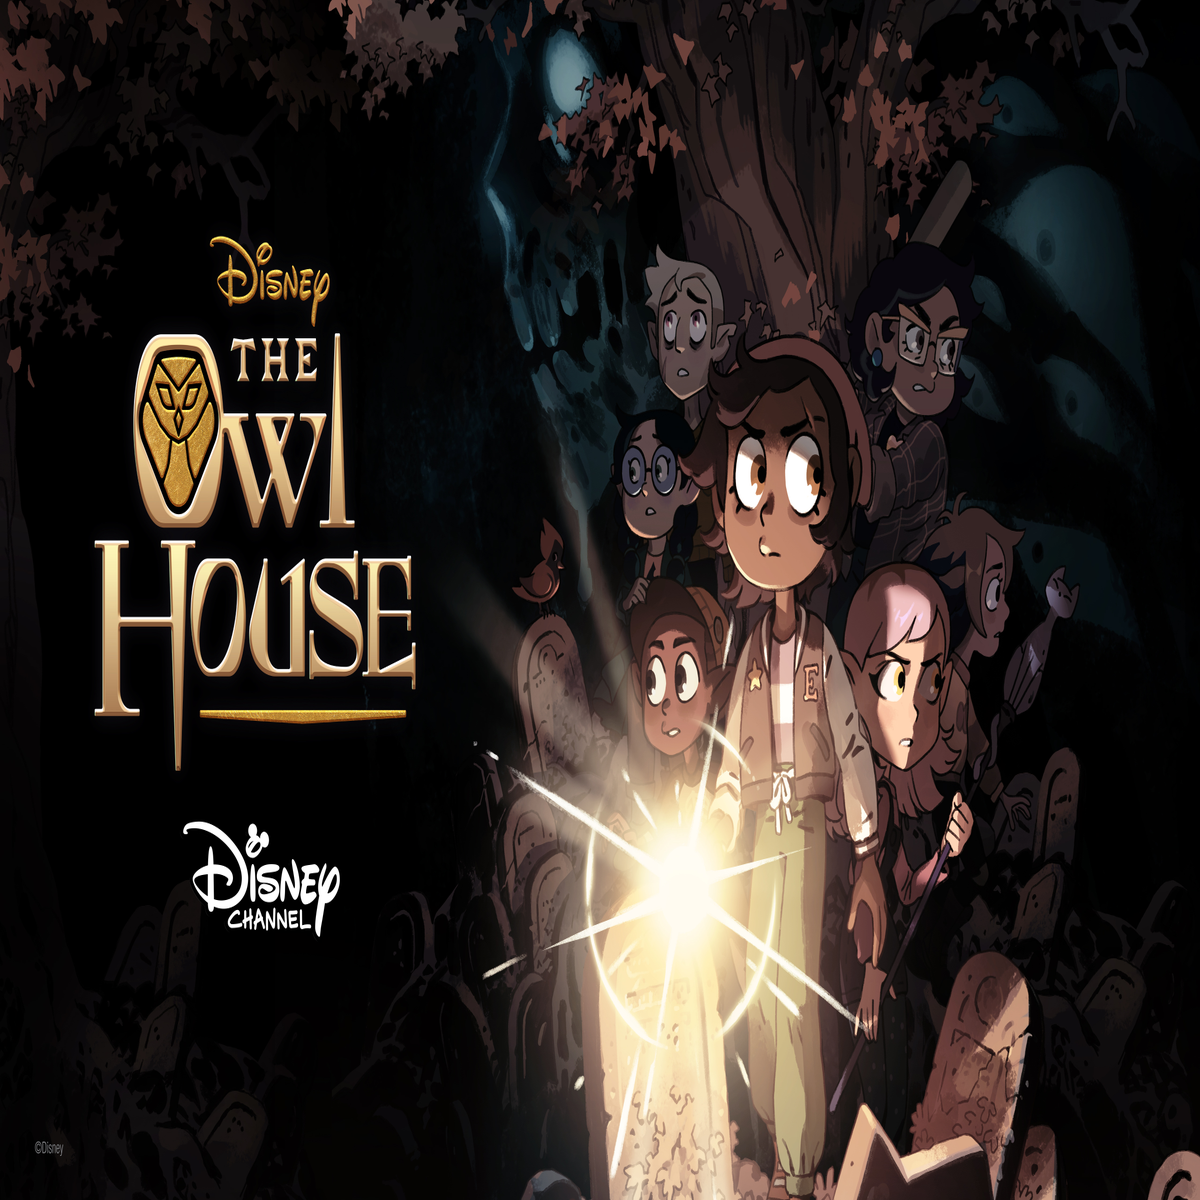 Disney's Super Queer Show 'The Owl House' Just Had a Perfect Ending